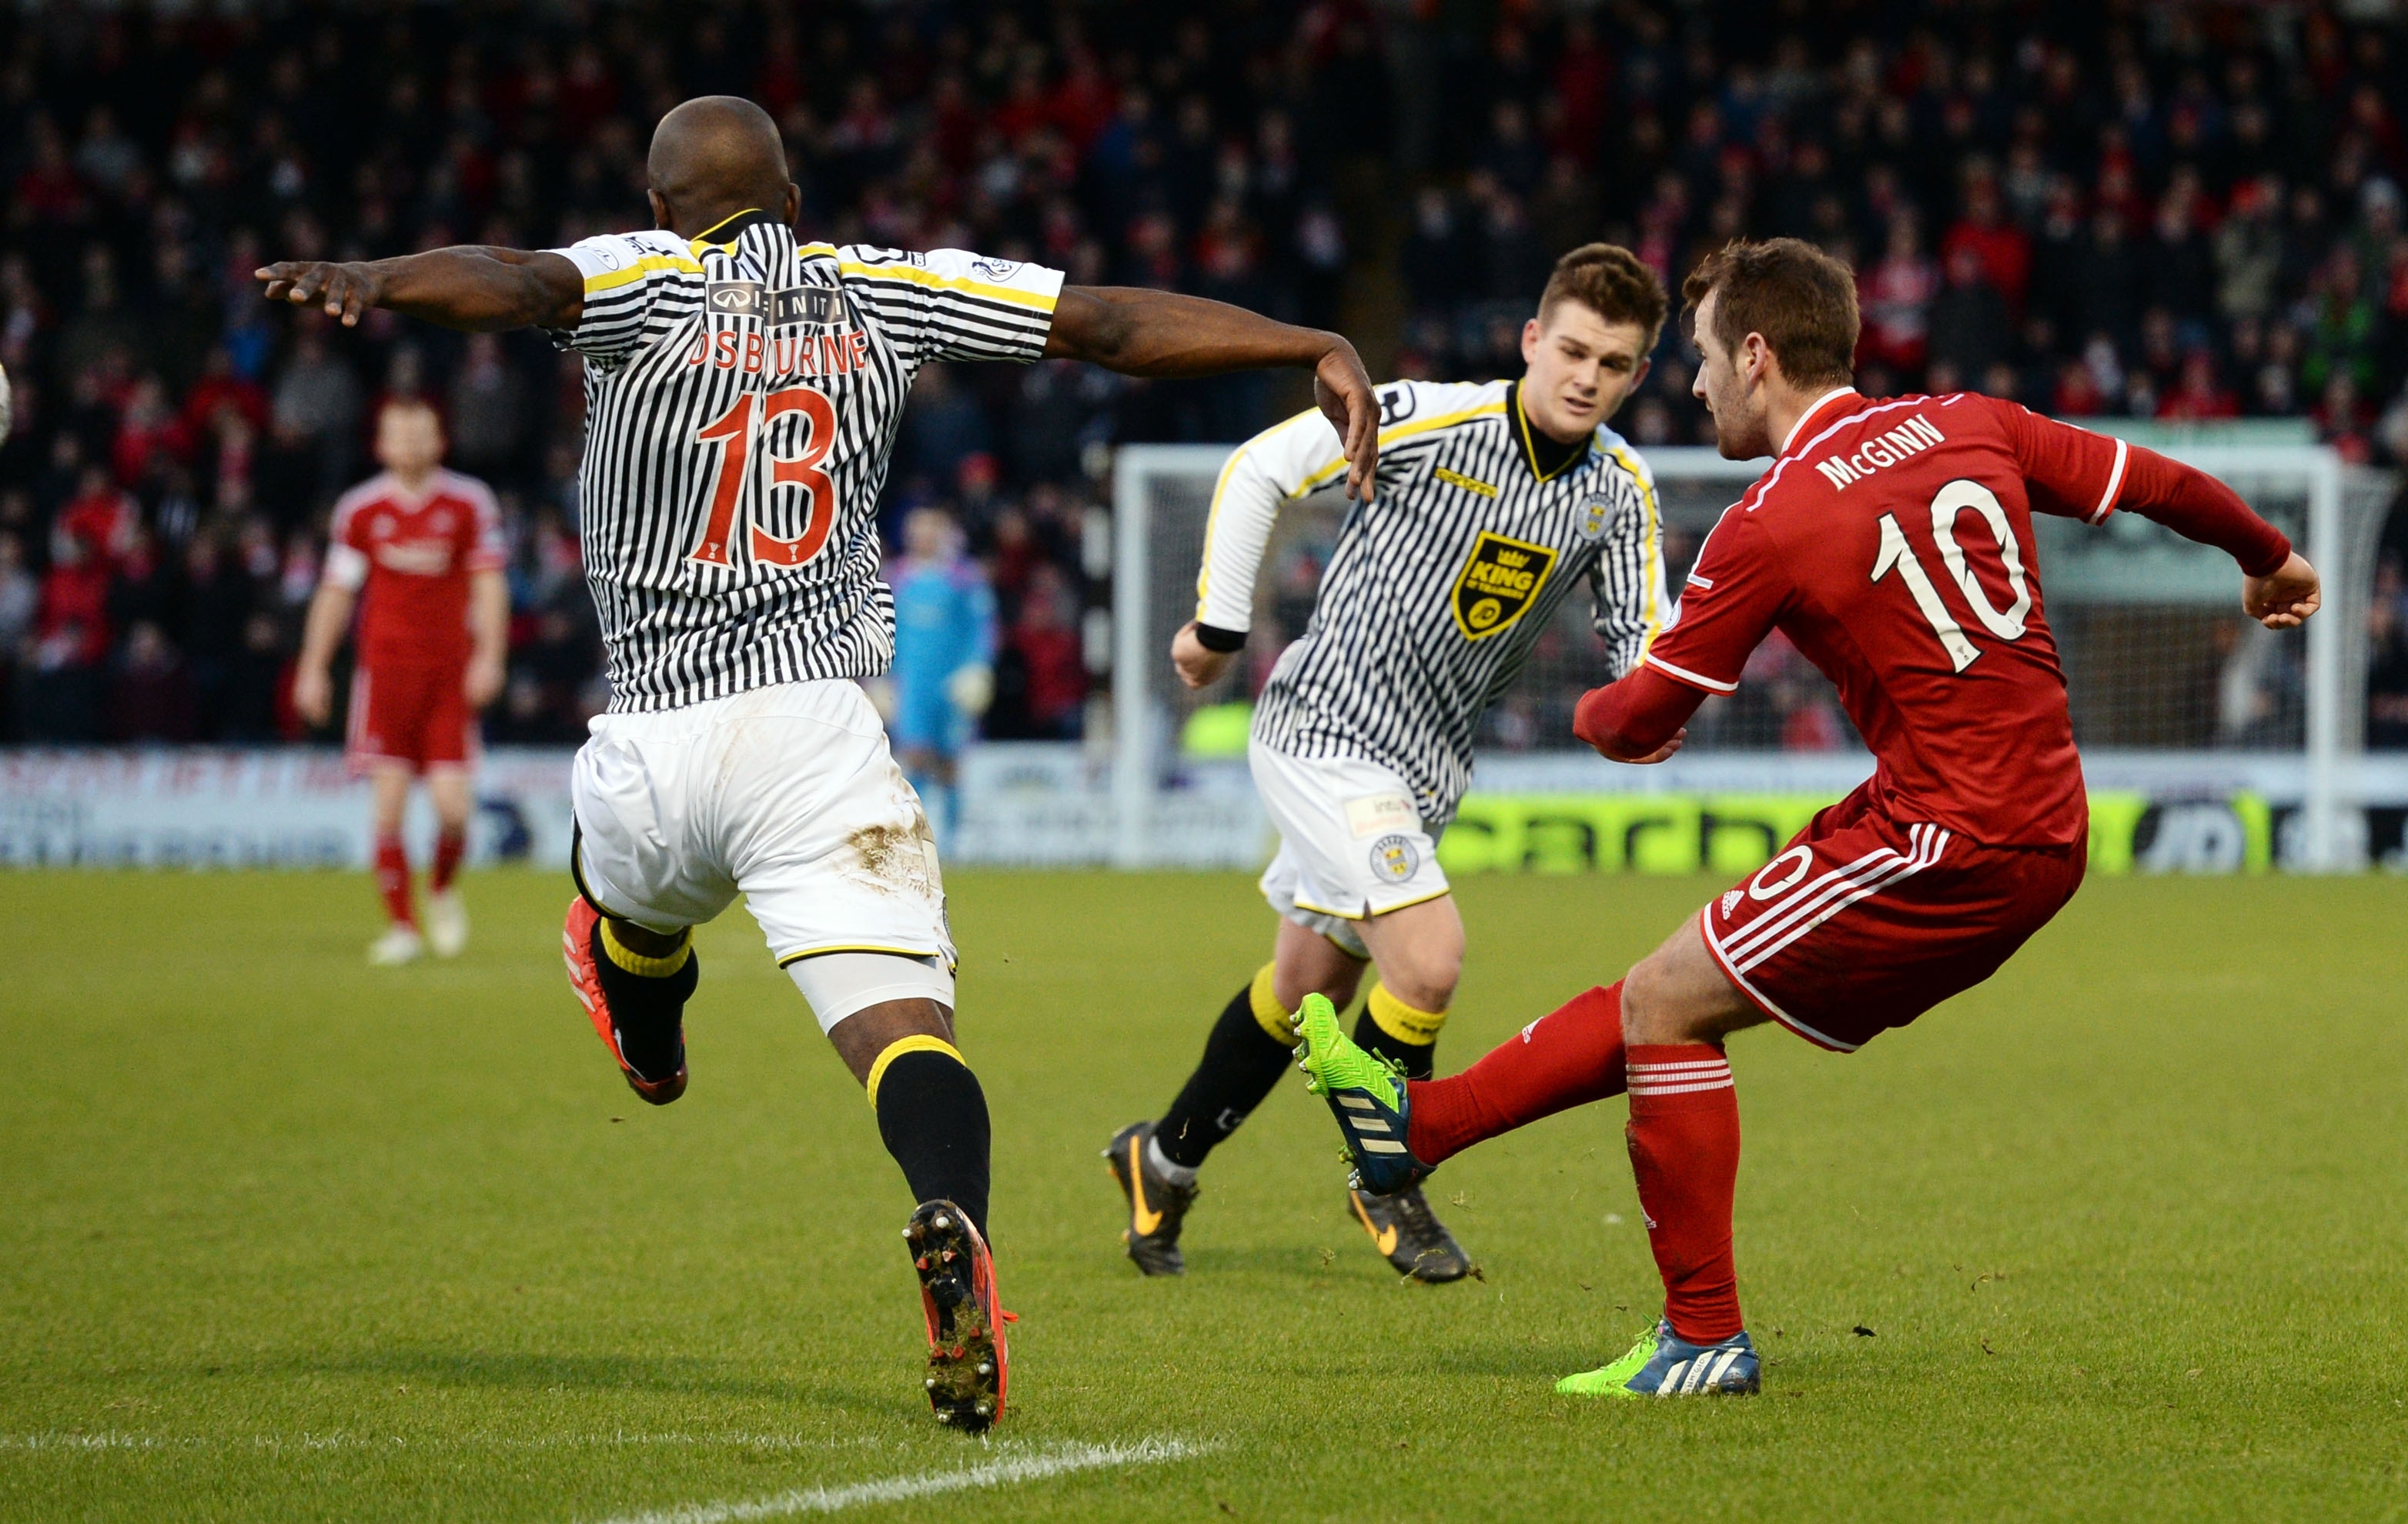 Aberdeen will take on St Mirren in the last-16 of the Betfred Cup.